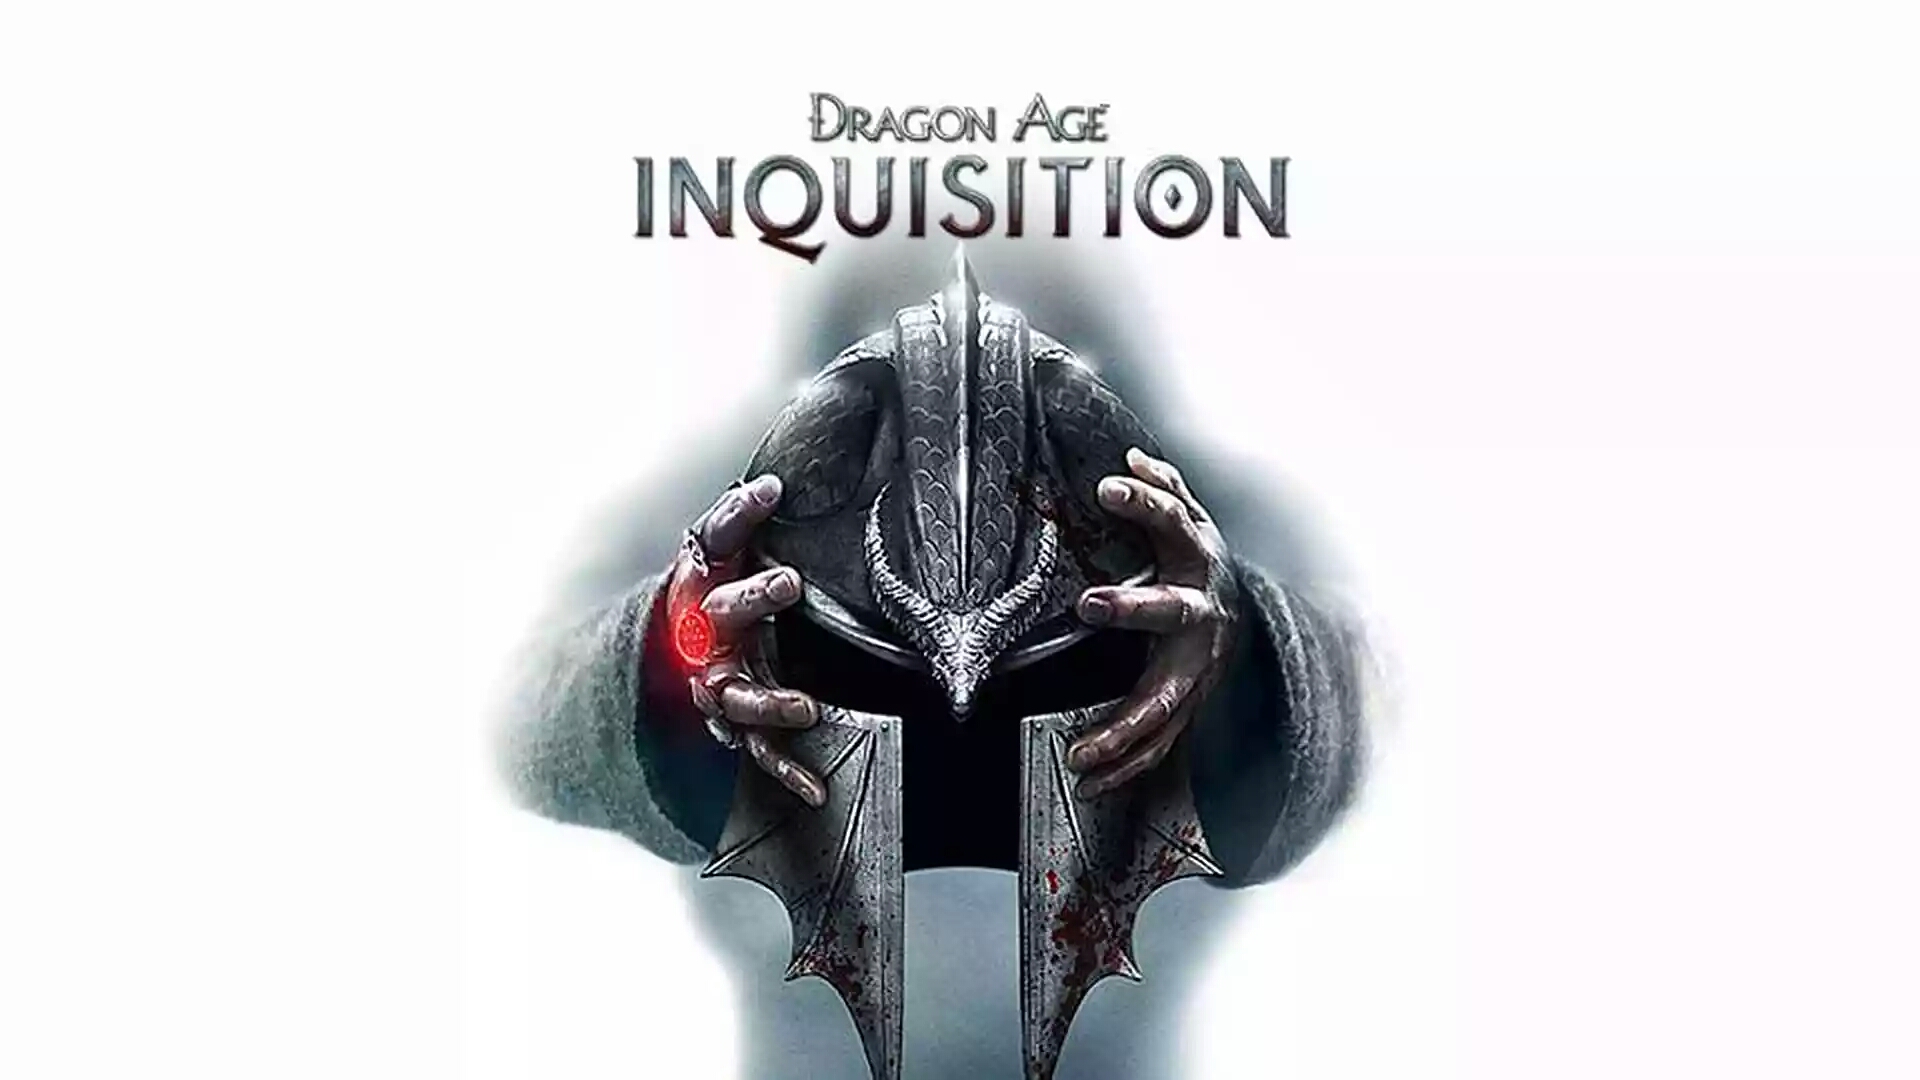 Dragonage Inquisition - Microsoft Xbox One video game collectible - Main Image 1